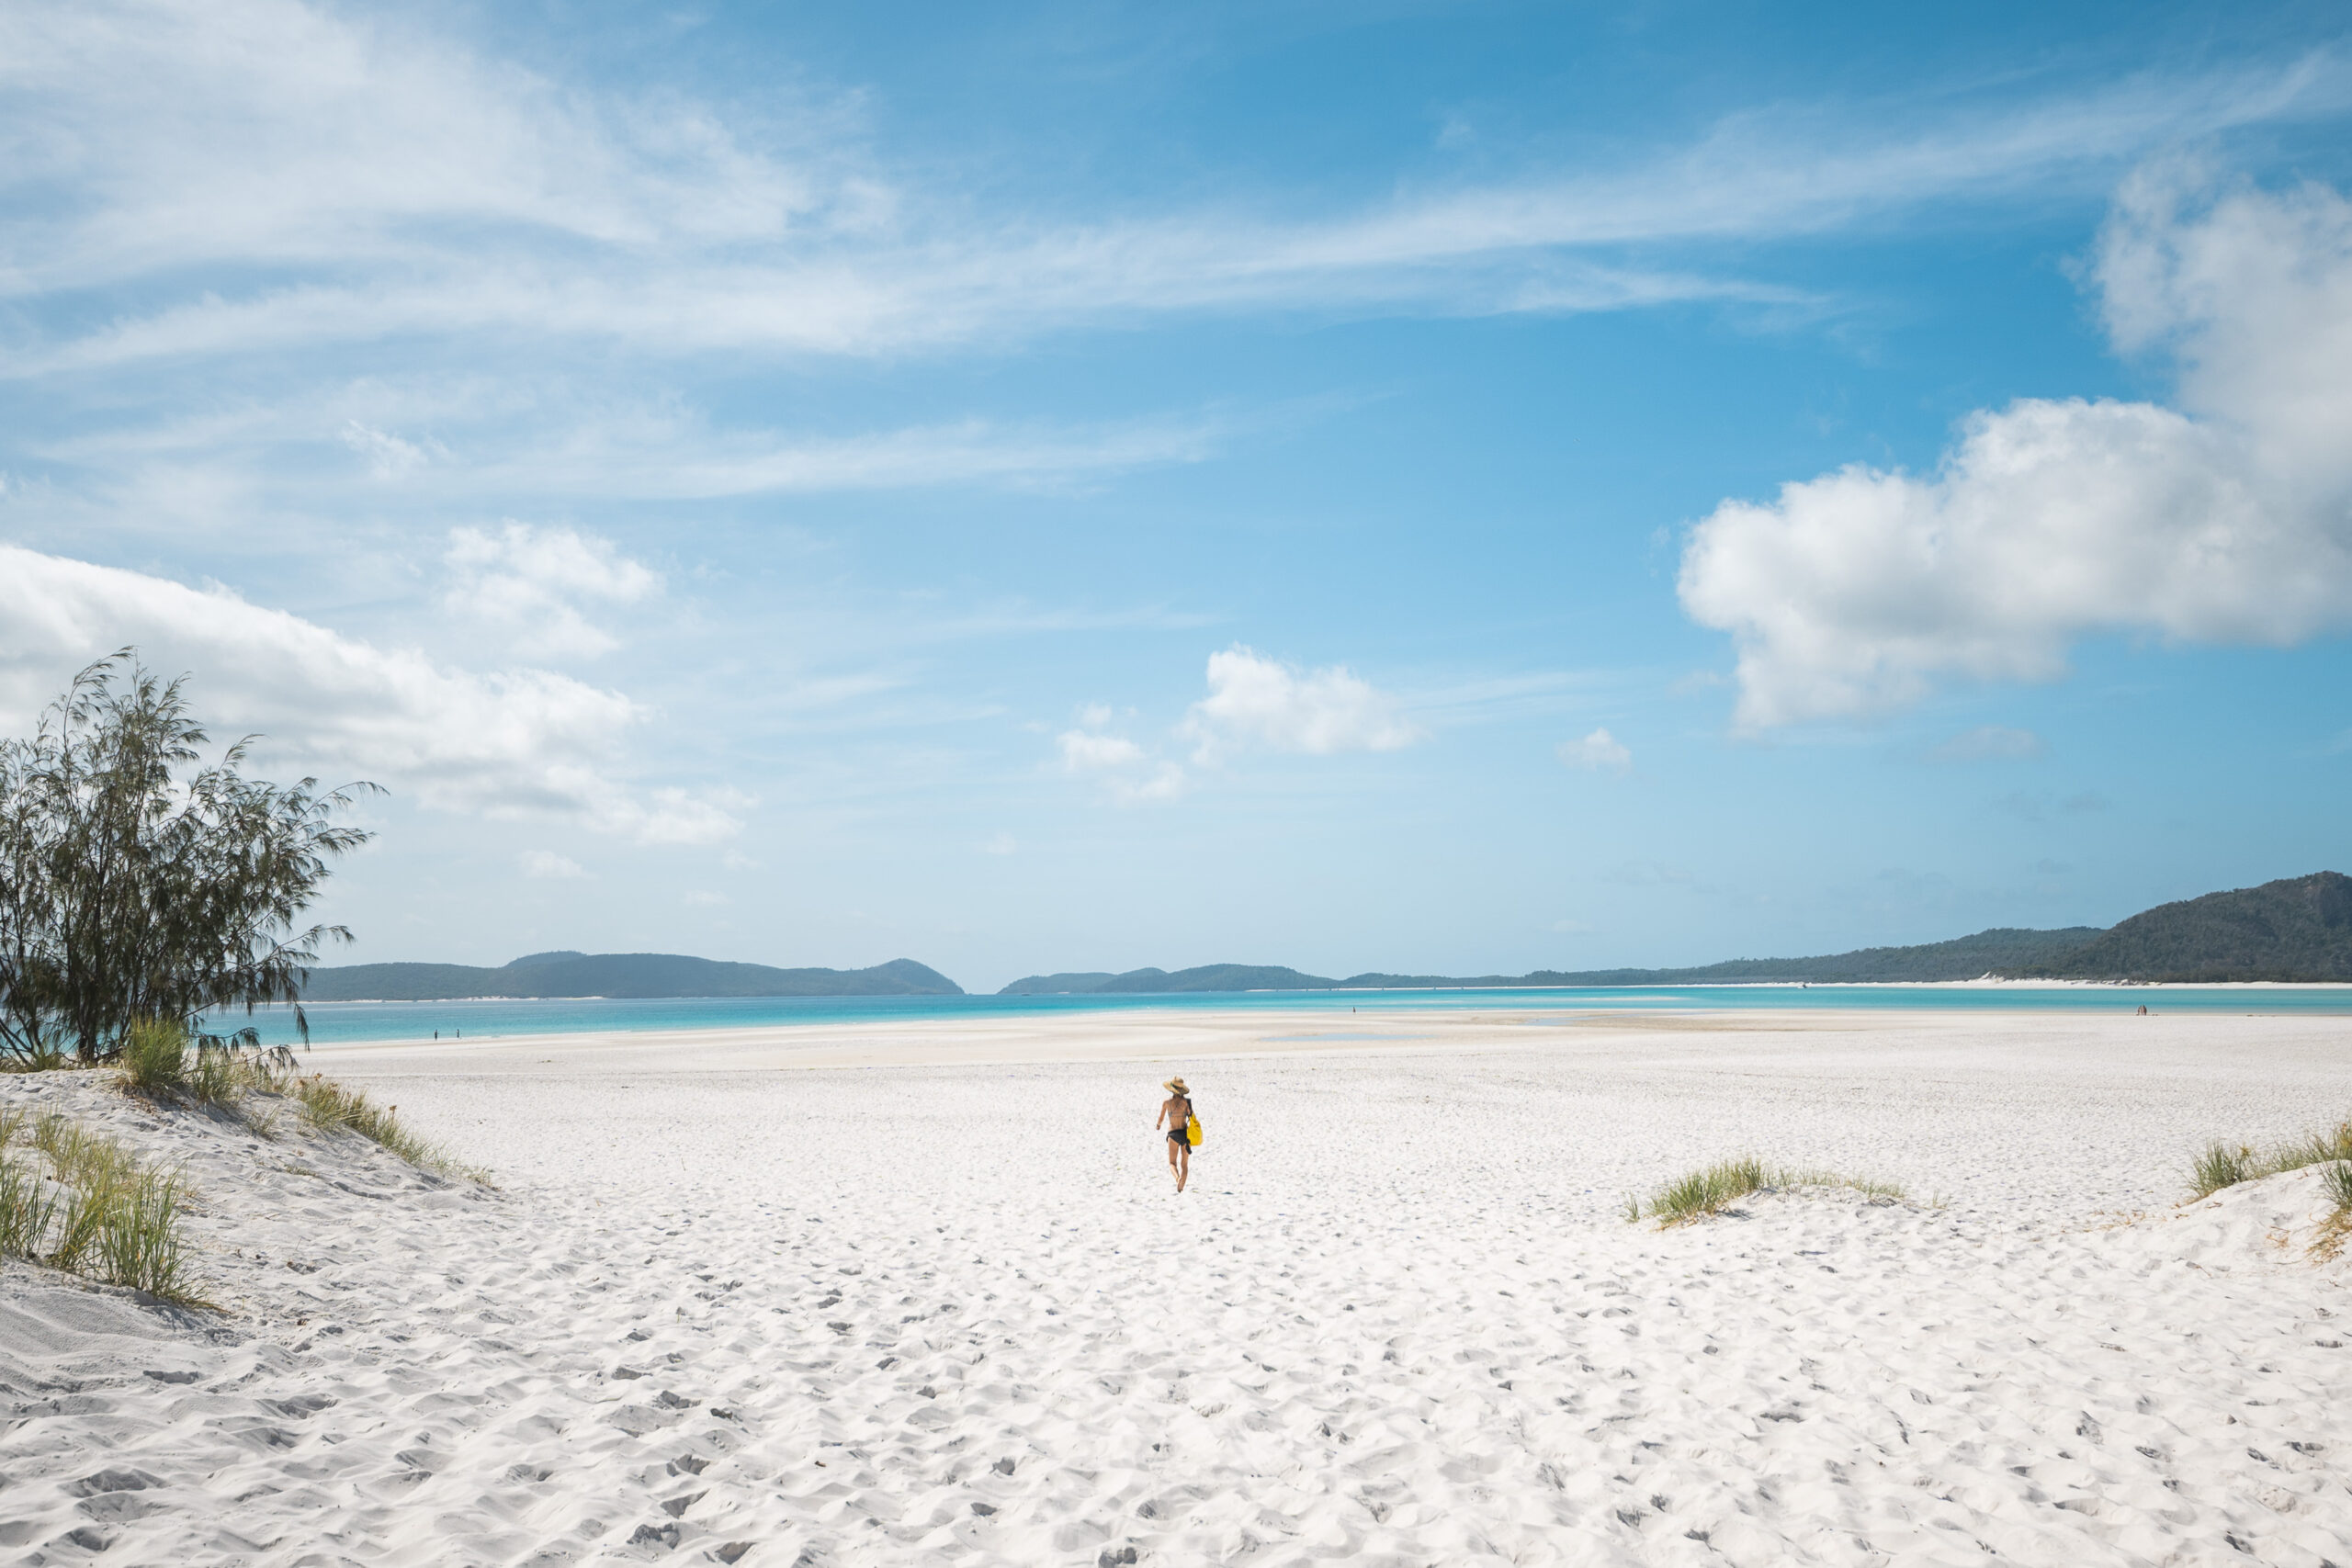 4 Day and 3 Night Whitsunday Maxi Sailing Adventure on Broomstick